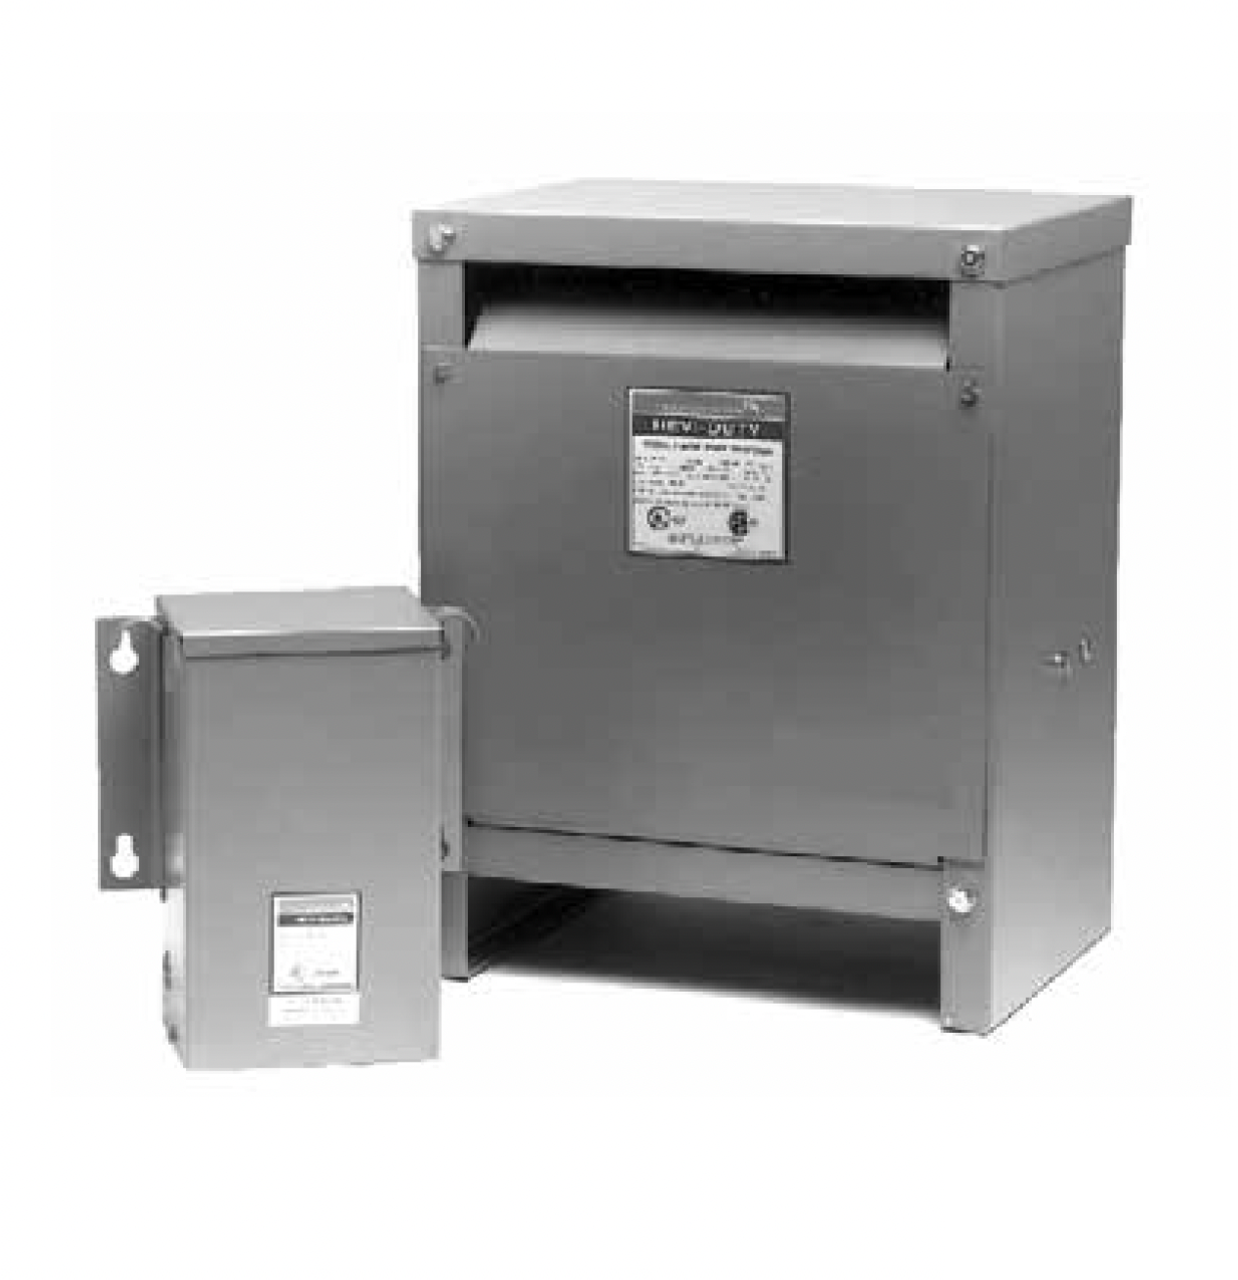 SolaHD Emerson - DT661H440S Dry-Type Distribution Transformers